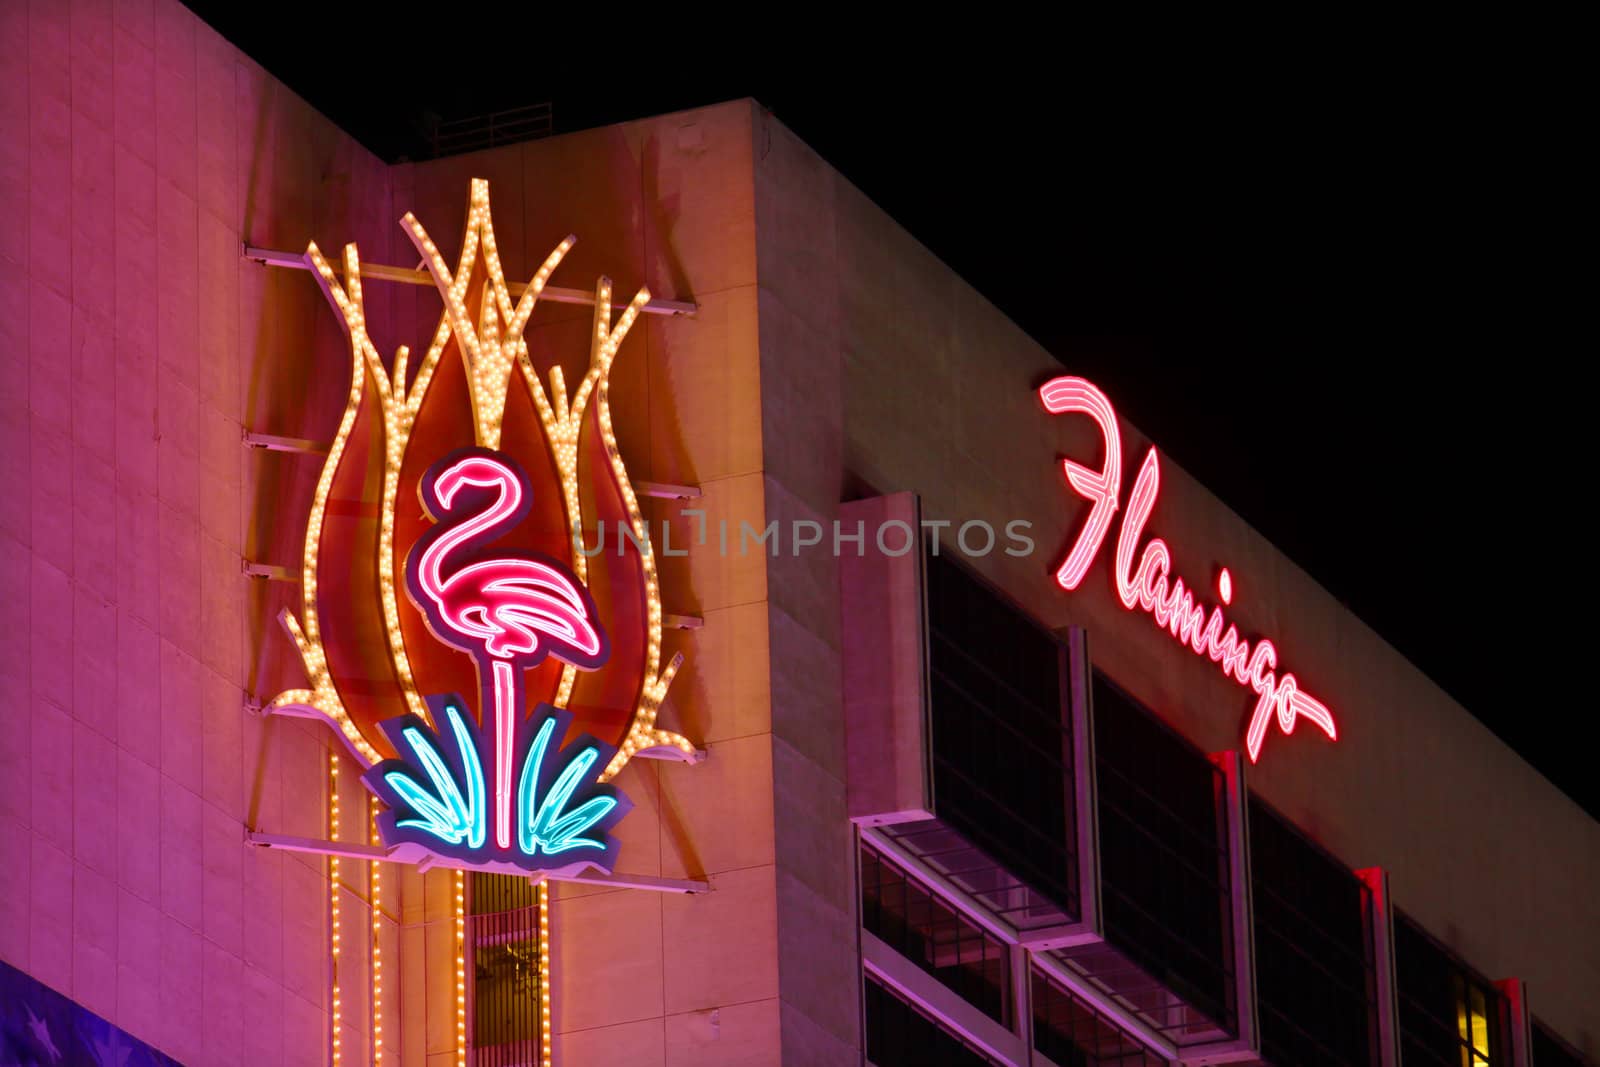 Las Vegas, USA - November 30, 2011: The Flamingo Las Vegas is a hotel and casino located on the famous Las Vegas Strip and has a art deco theme.  Seen here is the top portion of the hotel building with decorative neon signs.